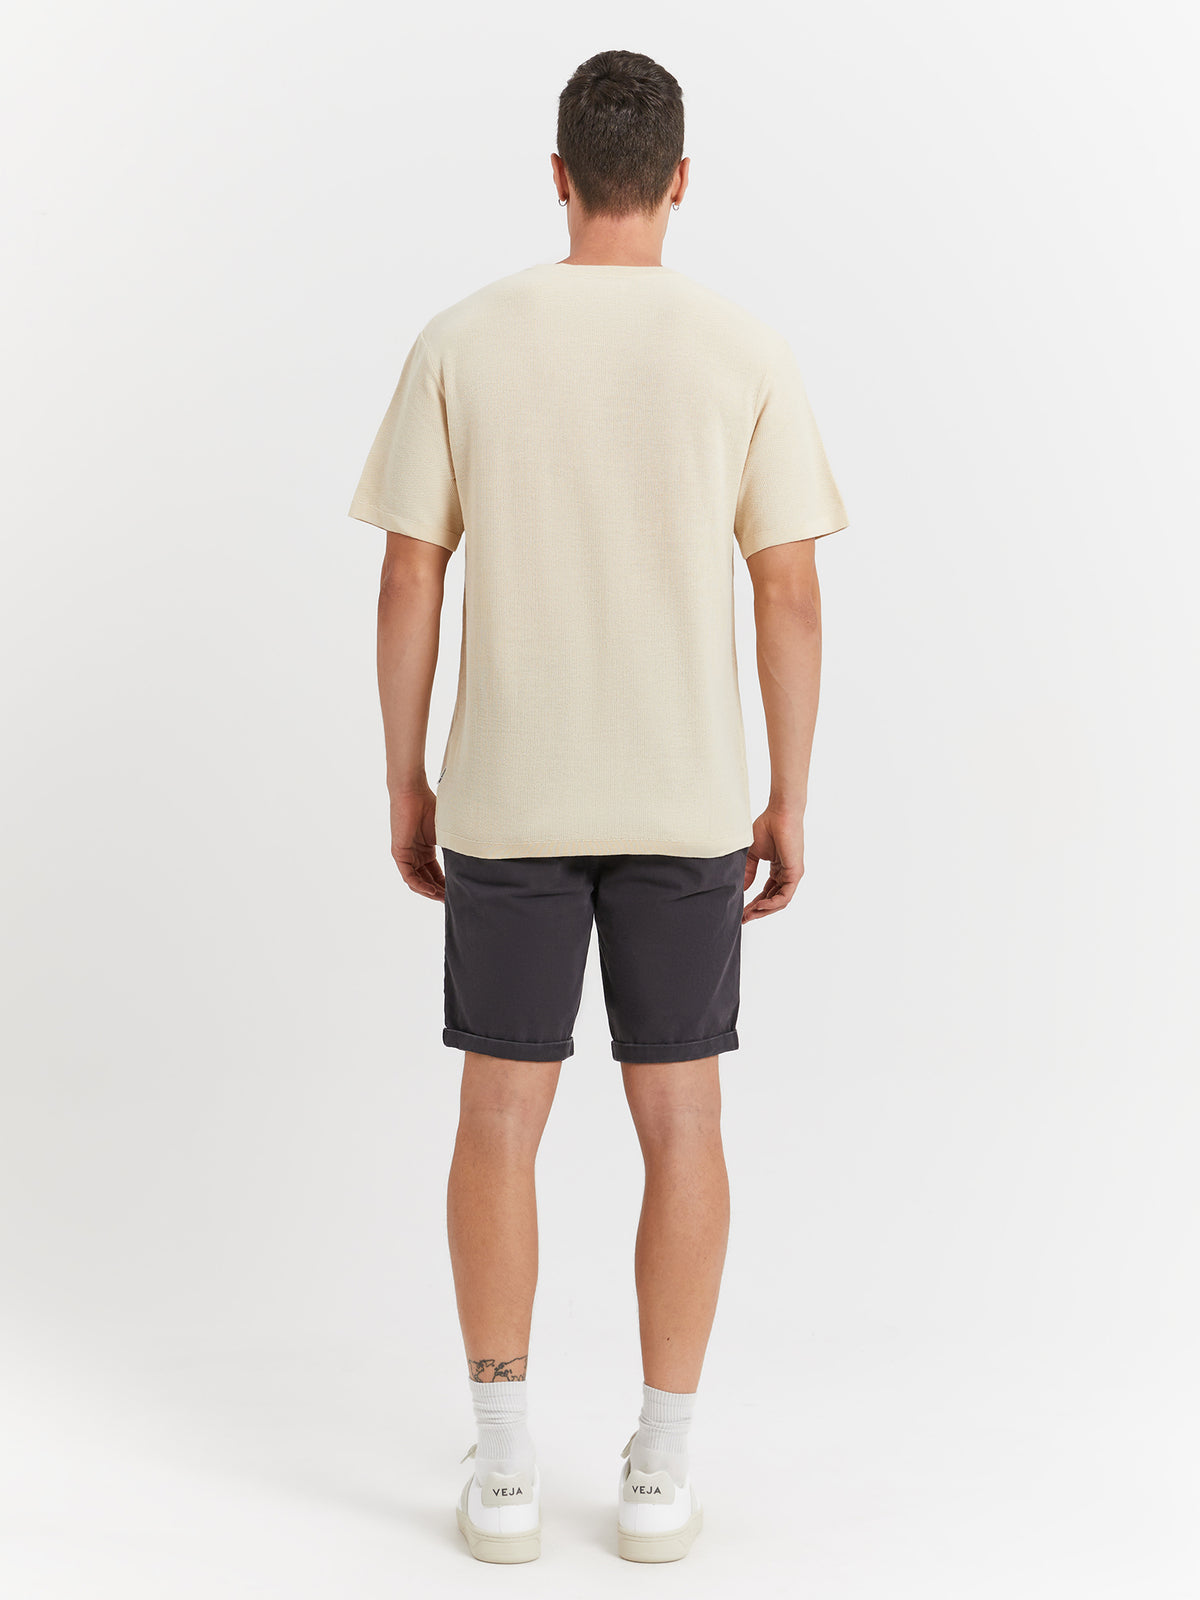 Hector Knit T-Shirt in Pearl